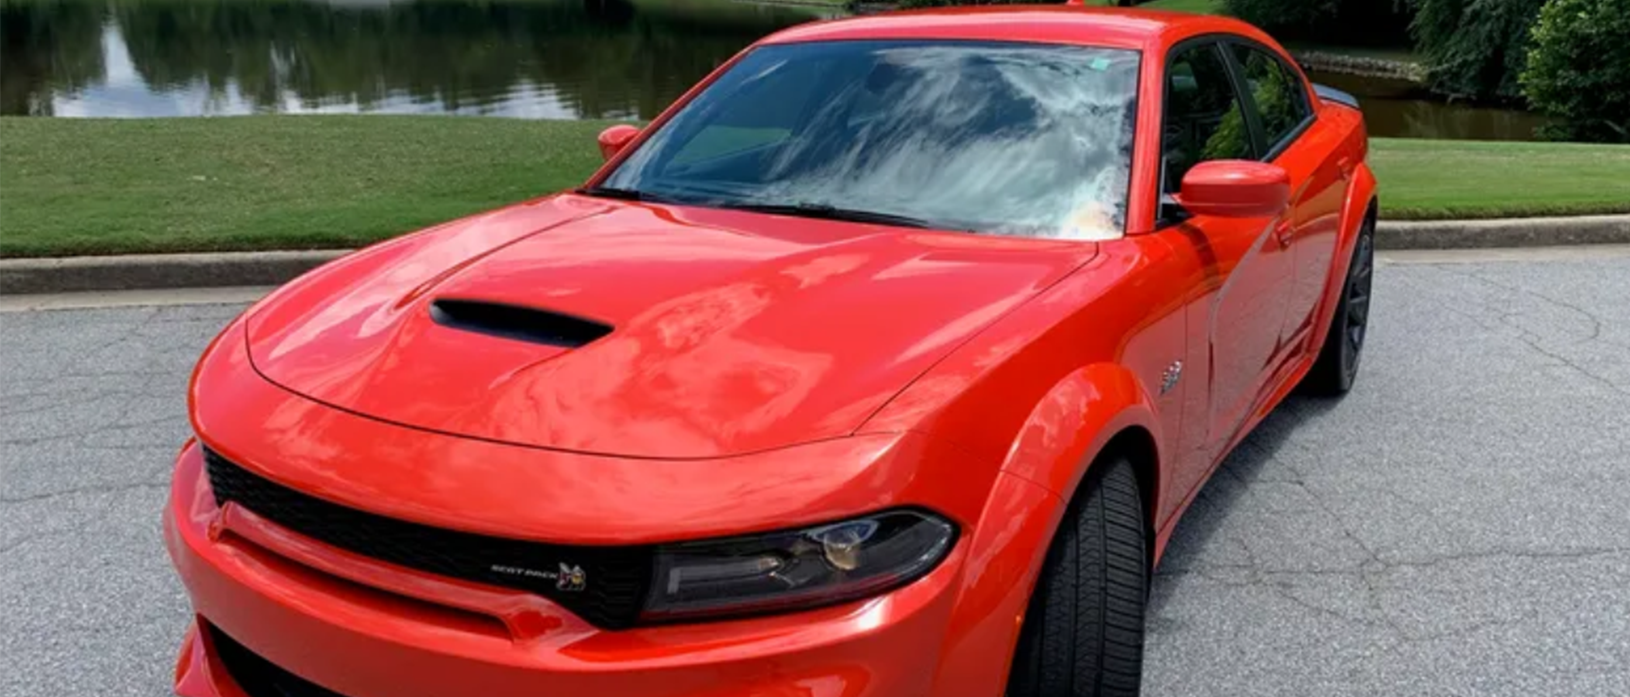 2020 Dodge Charger Scat Pack Widebody